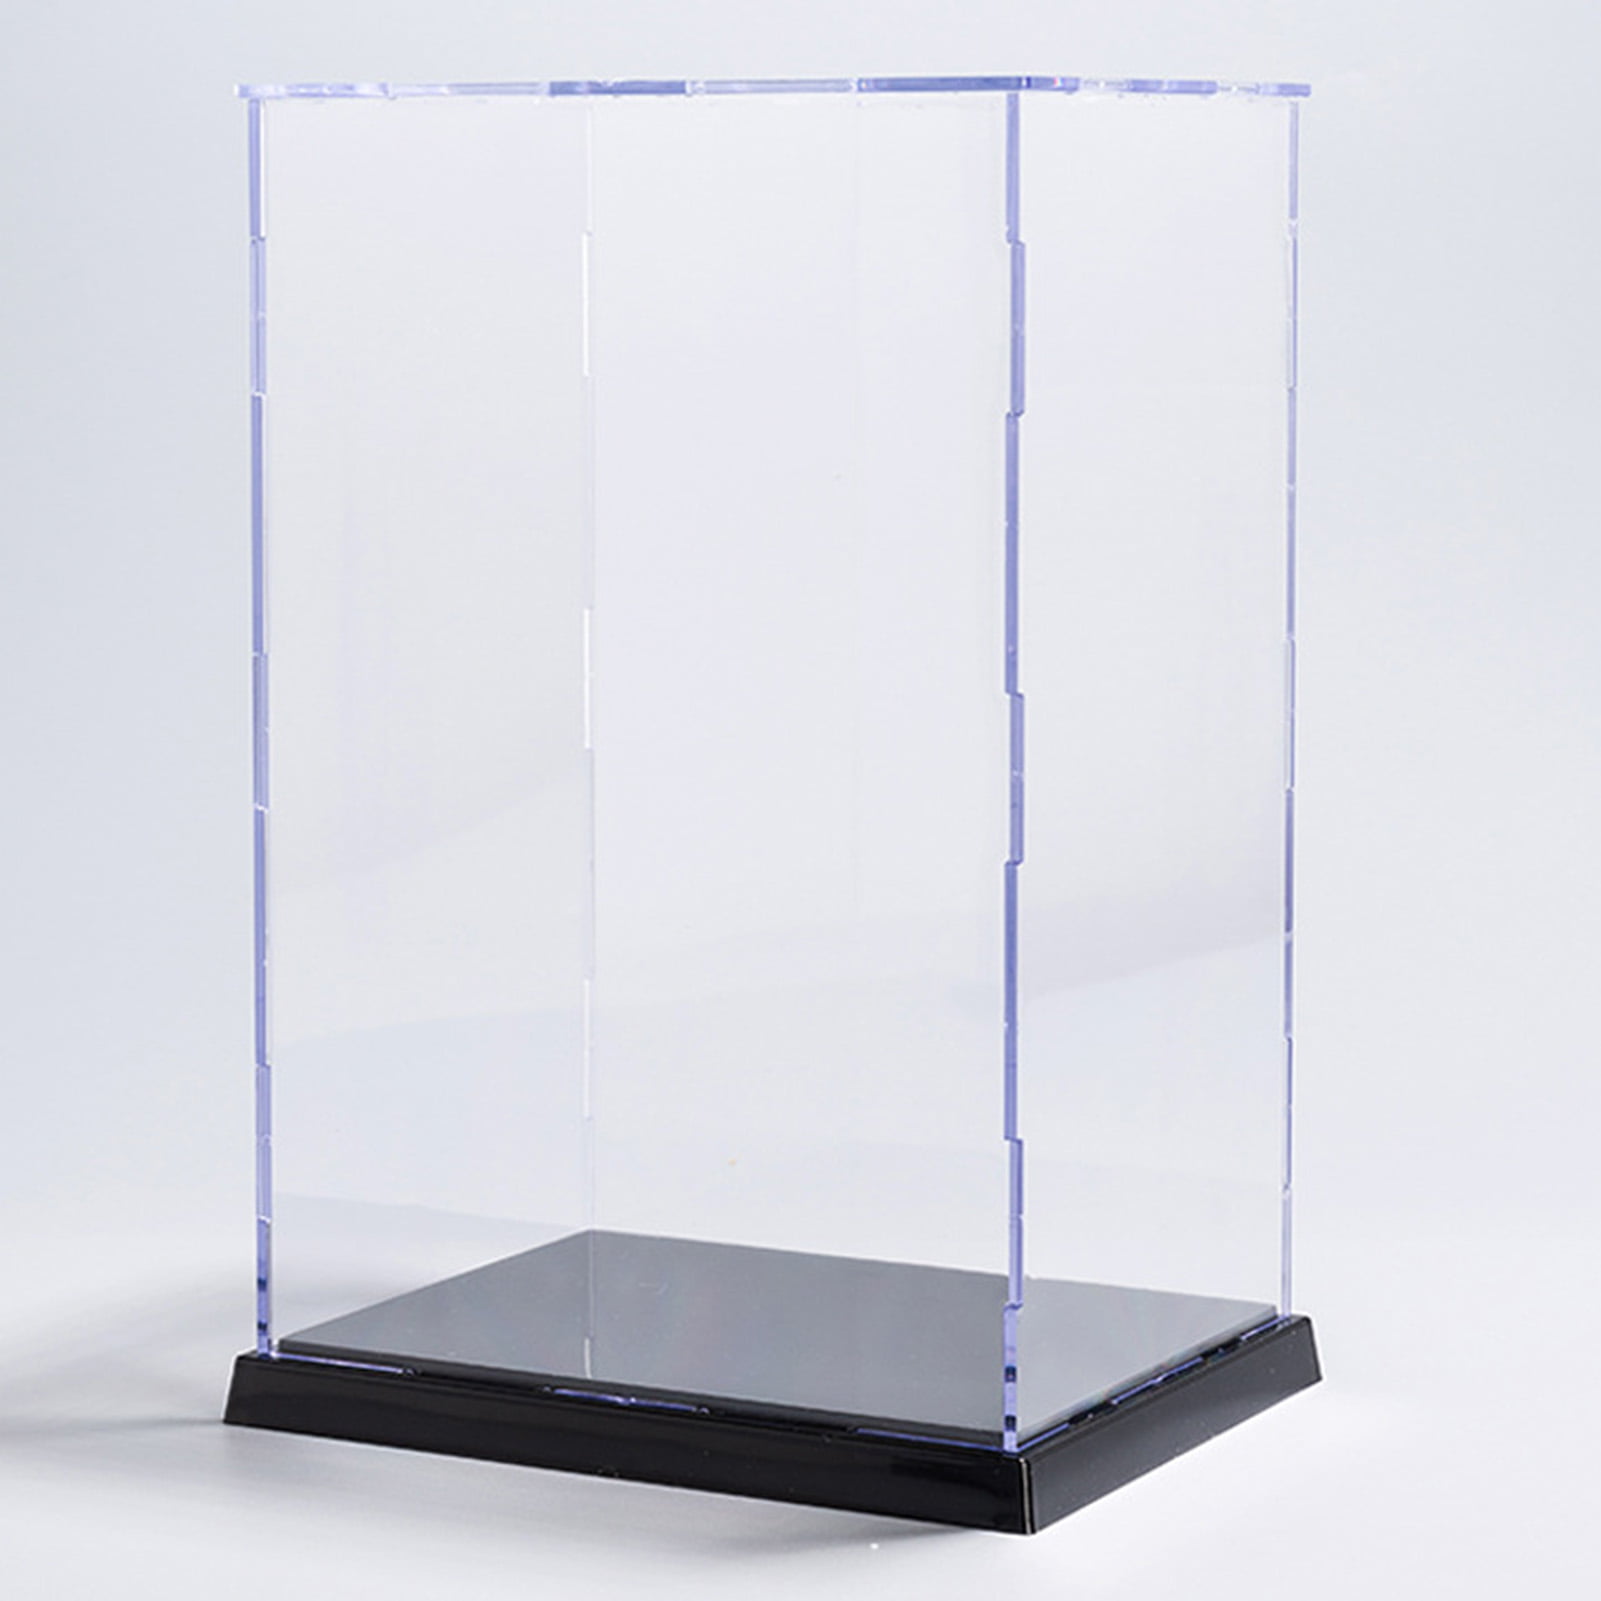 Toys Self-Assembly Acrylic Display Case,Cube Acrylic Box for Display,Versatile Acrylic Display Case,Display case for Collectibles Home Organization,Memorabilia 